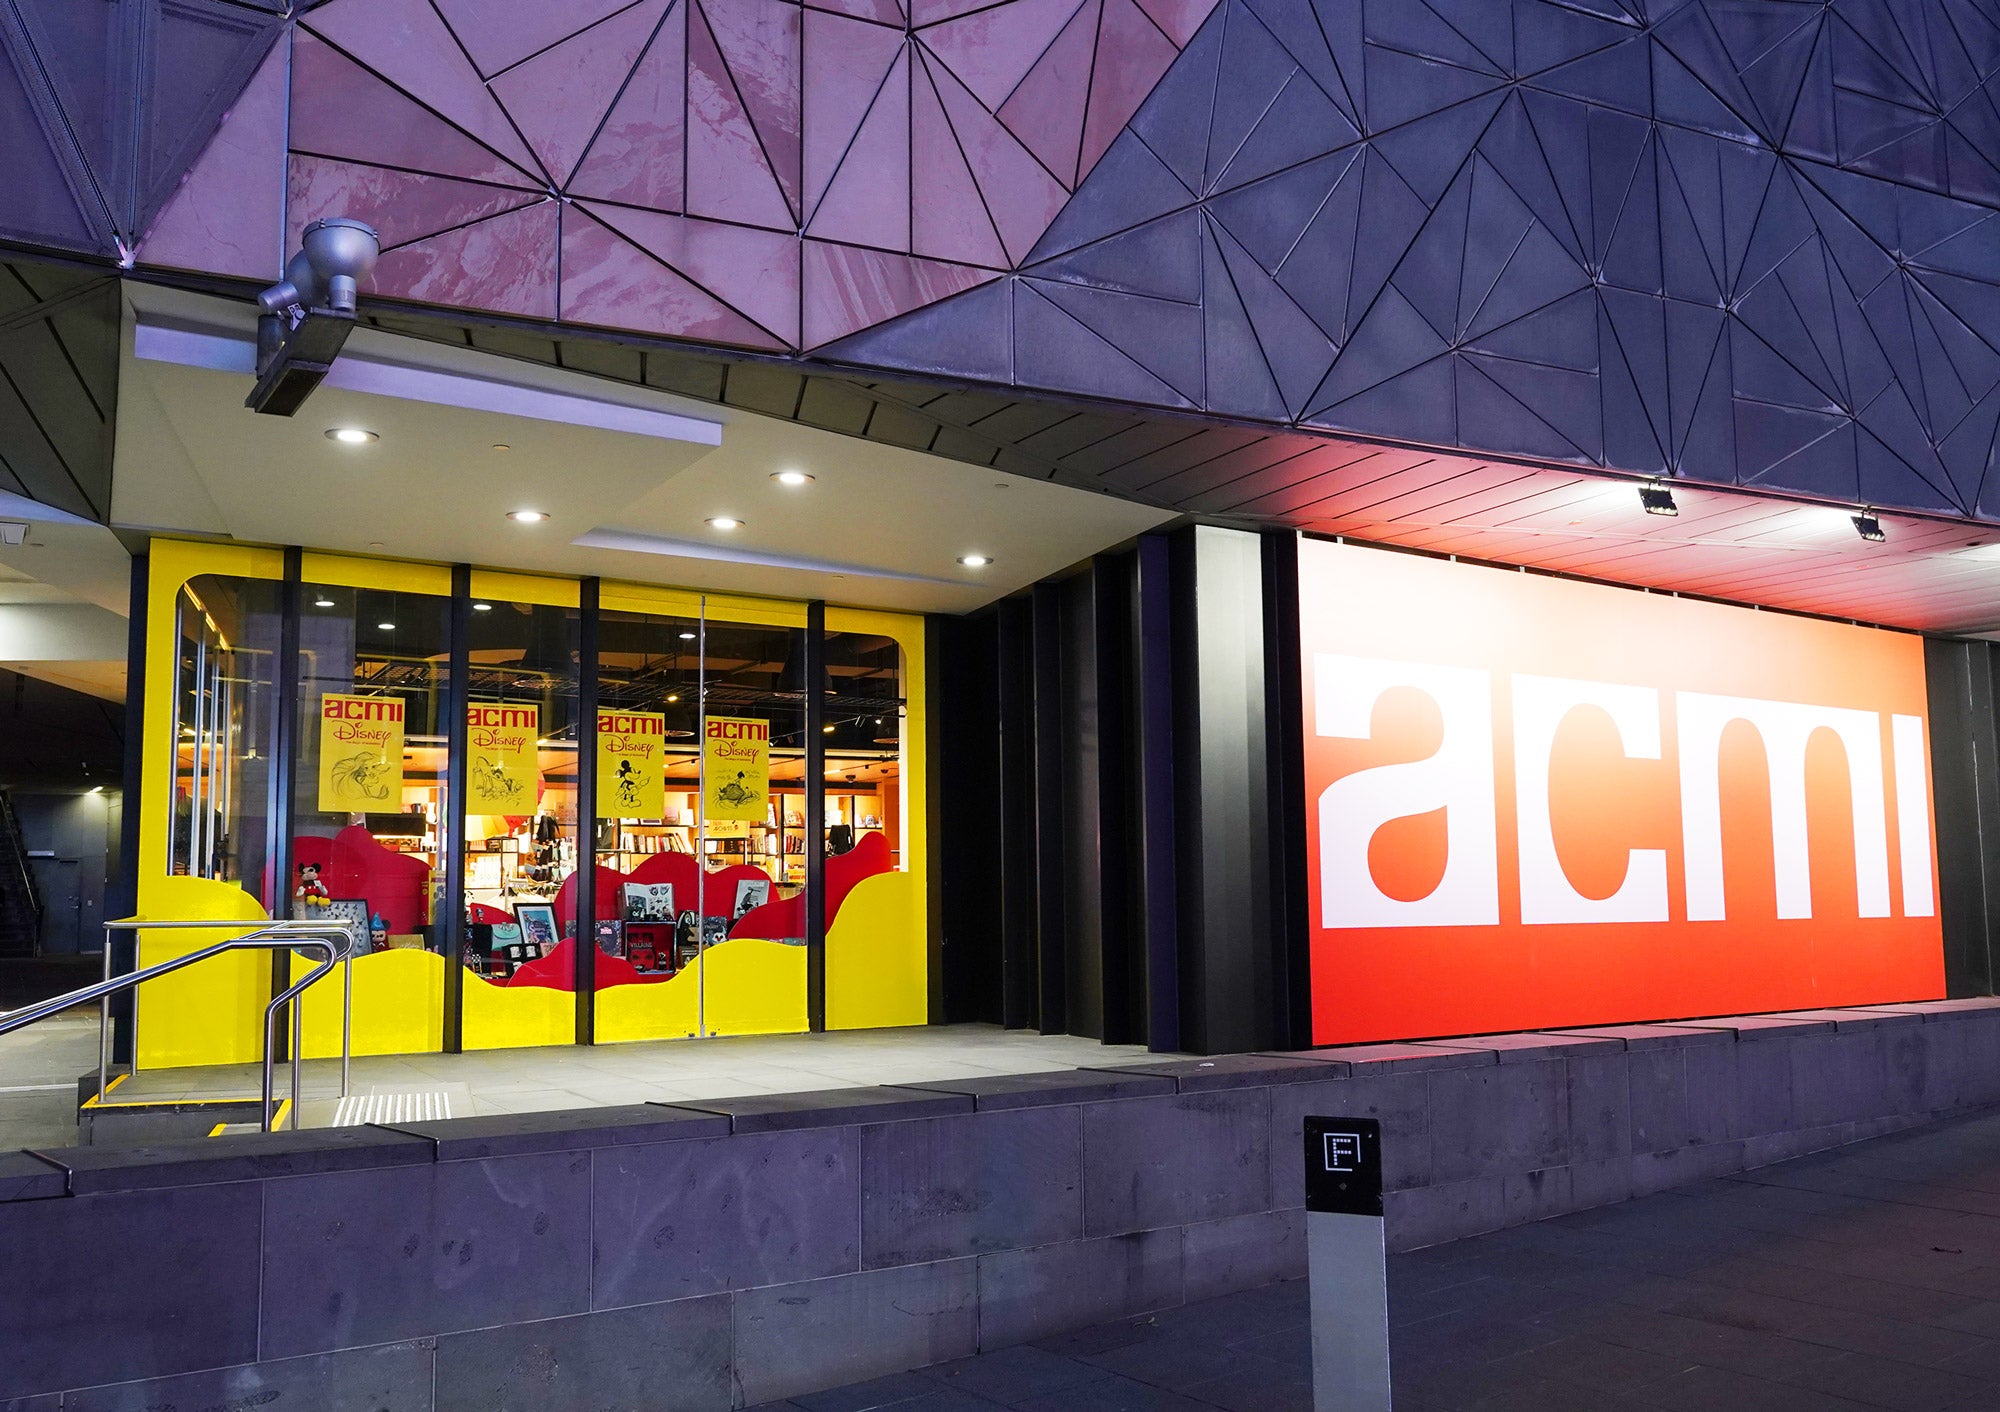 A Disney-themed retail window installation in the ACMI design shop, designed by Kitiya Palaskas Studio, with large red and white abstract window details, red abstract flat set pieces, and lots of Disney products. 